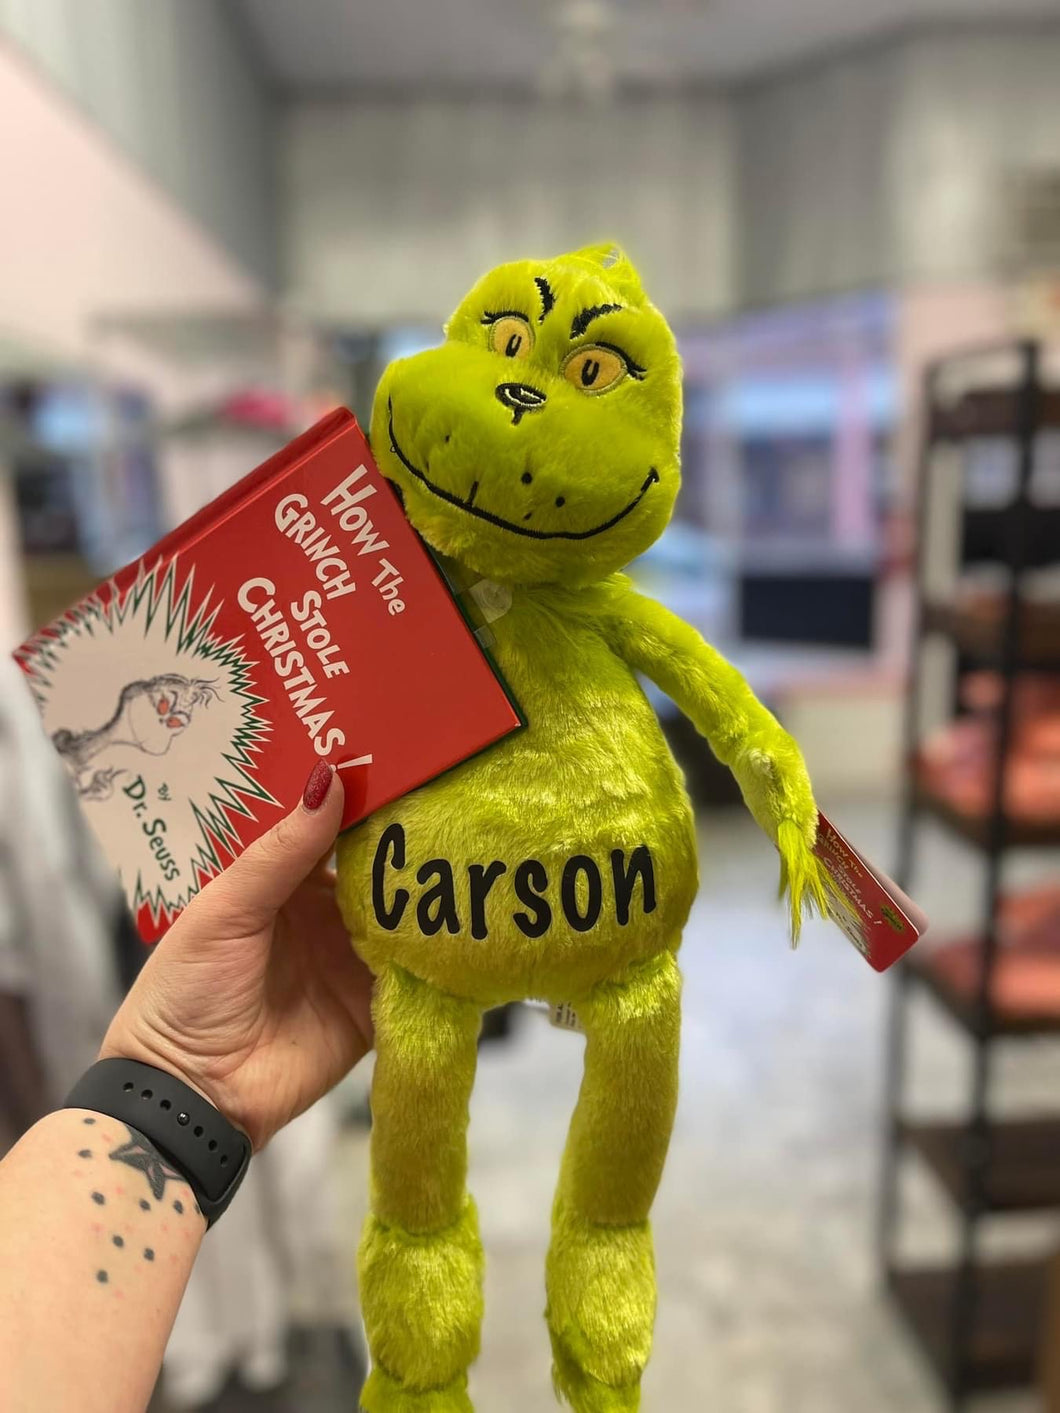 How the Grinch stole Christmas plush doll & book